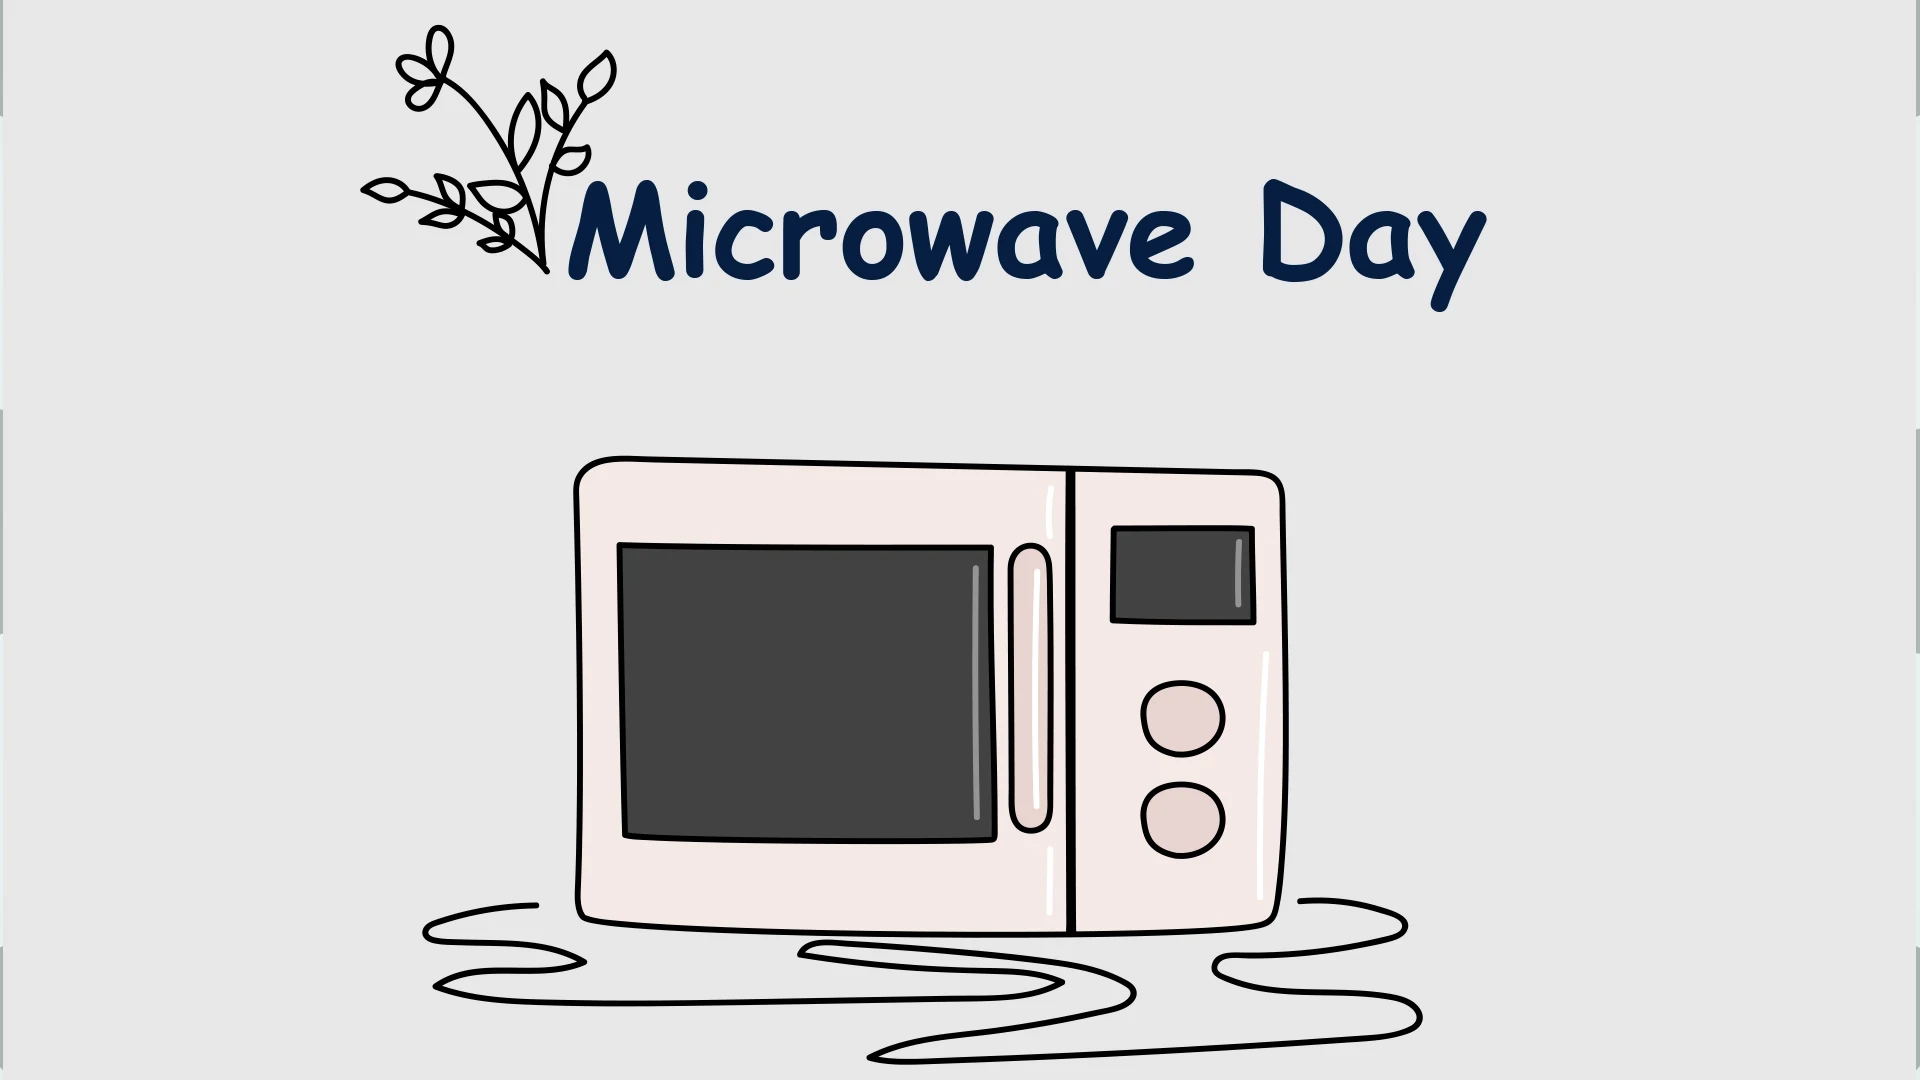 Microwave Day This Post Design By The Revolution Deshbhakt Hindustani